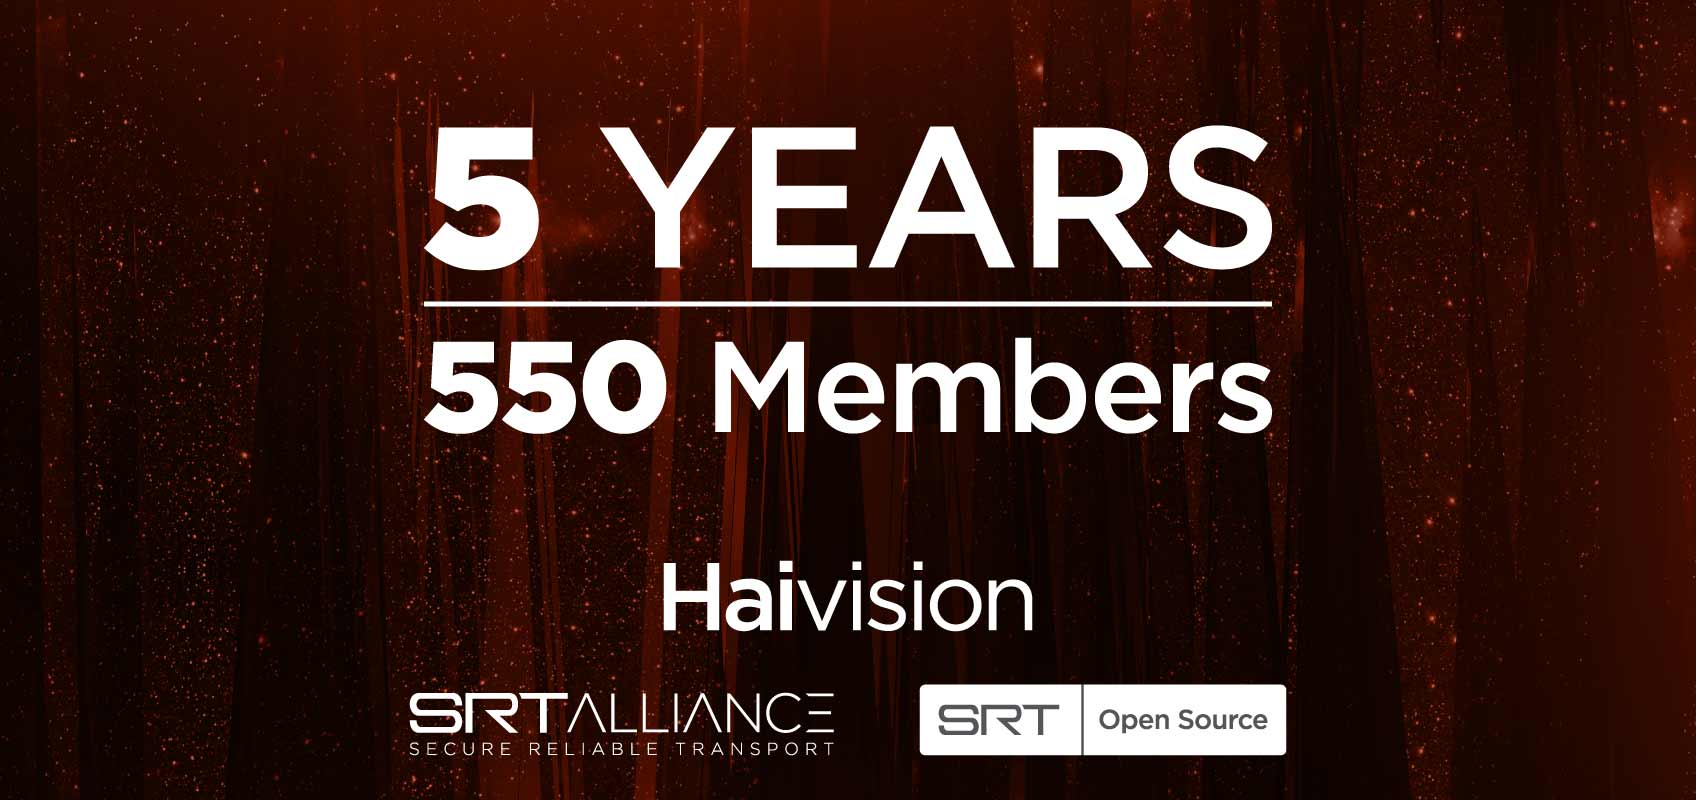 SRT 5 years and SRT Alliance has 550 members